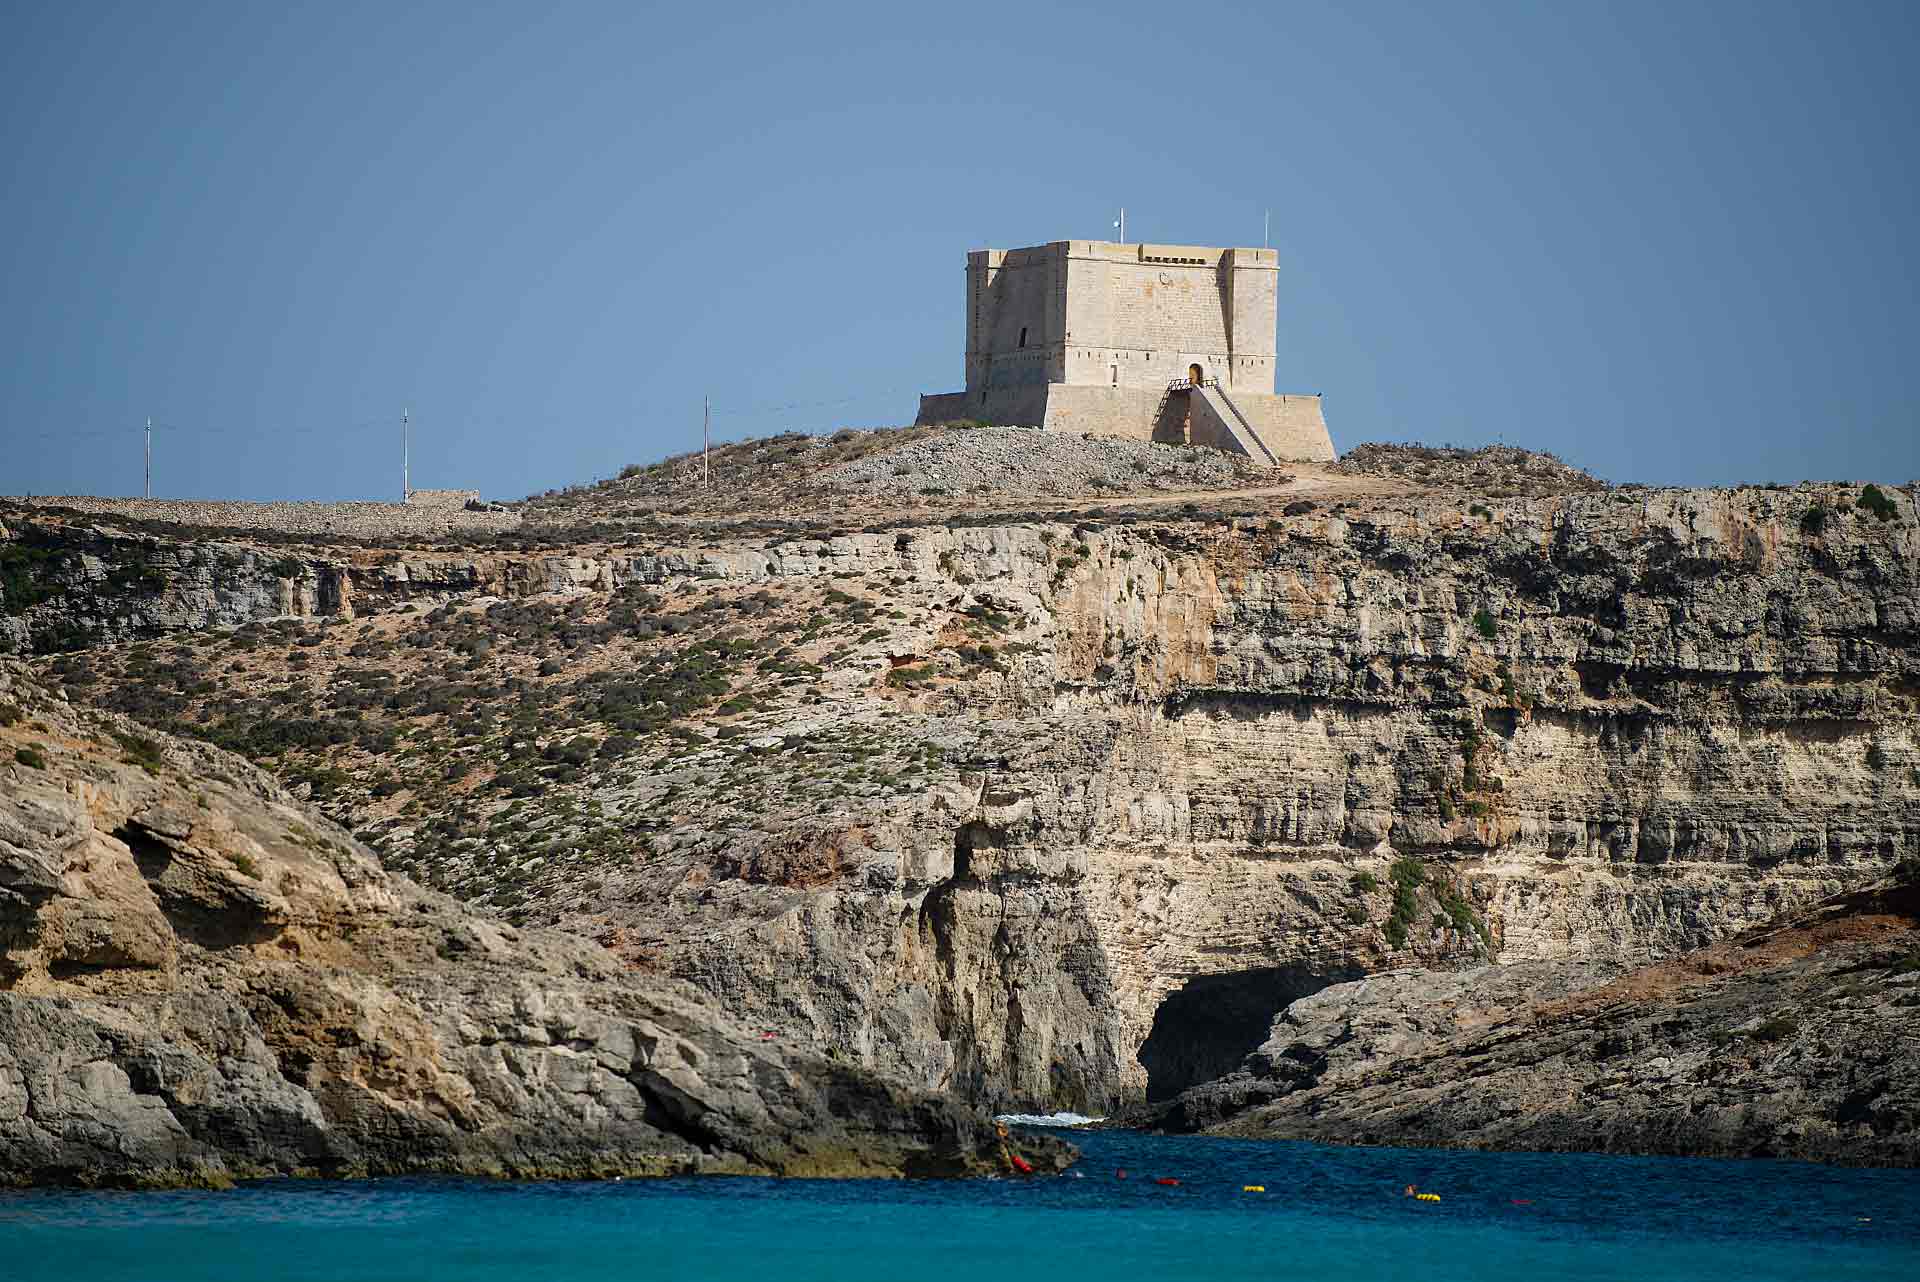 St Mary's Tower in Comino